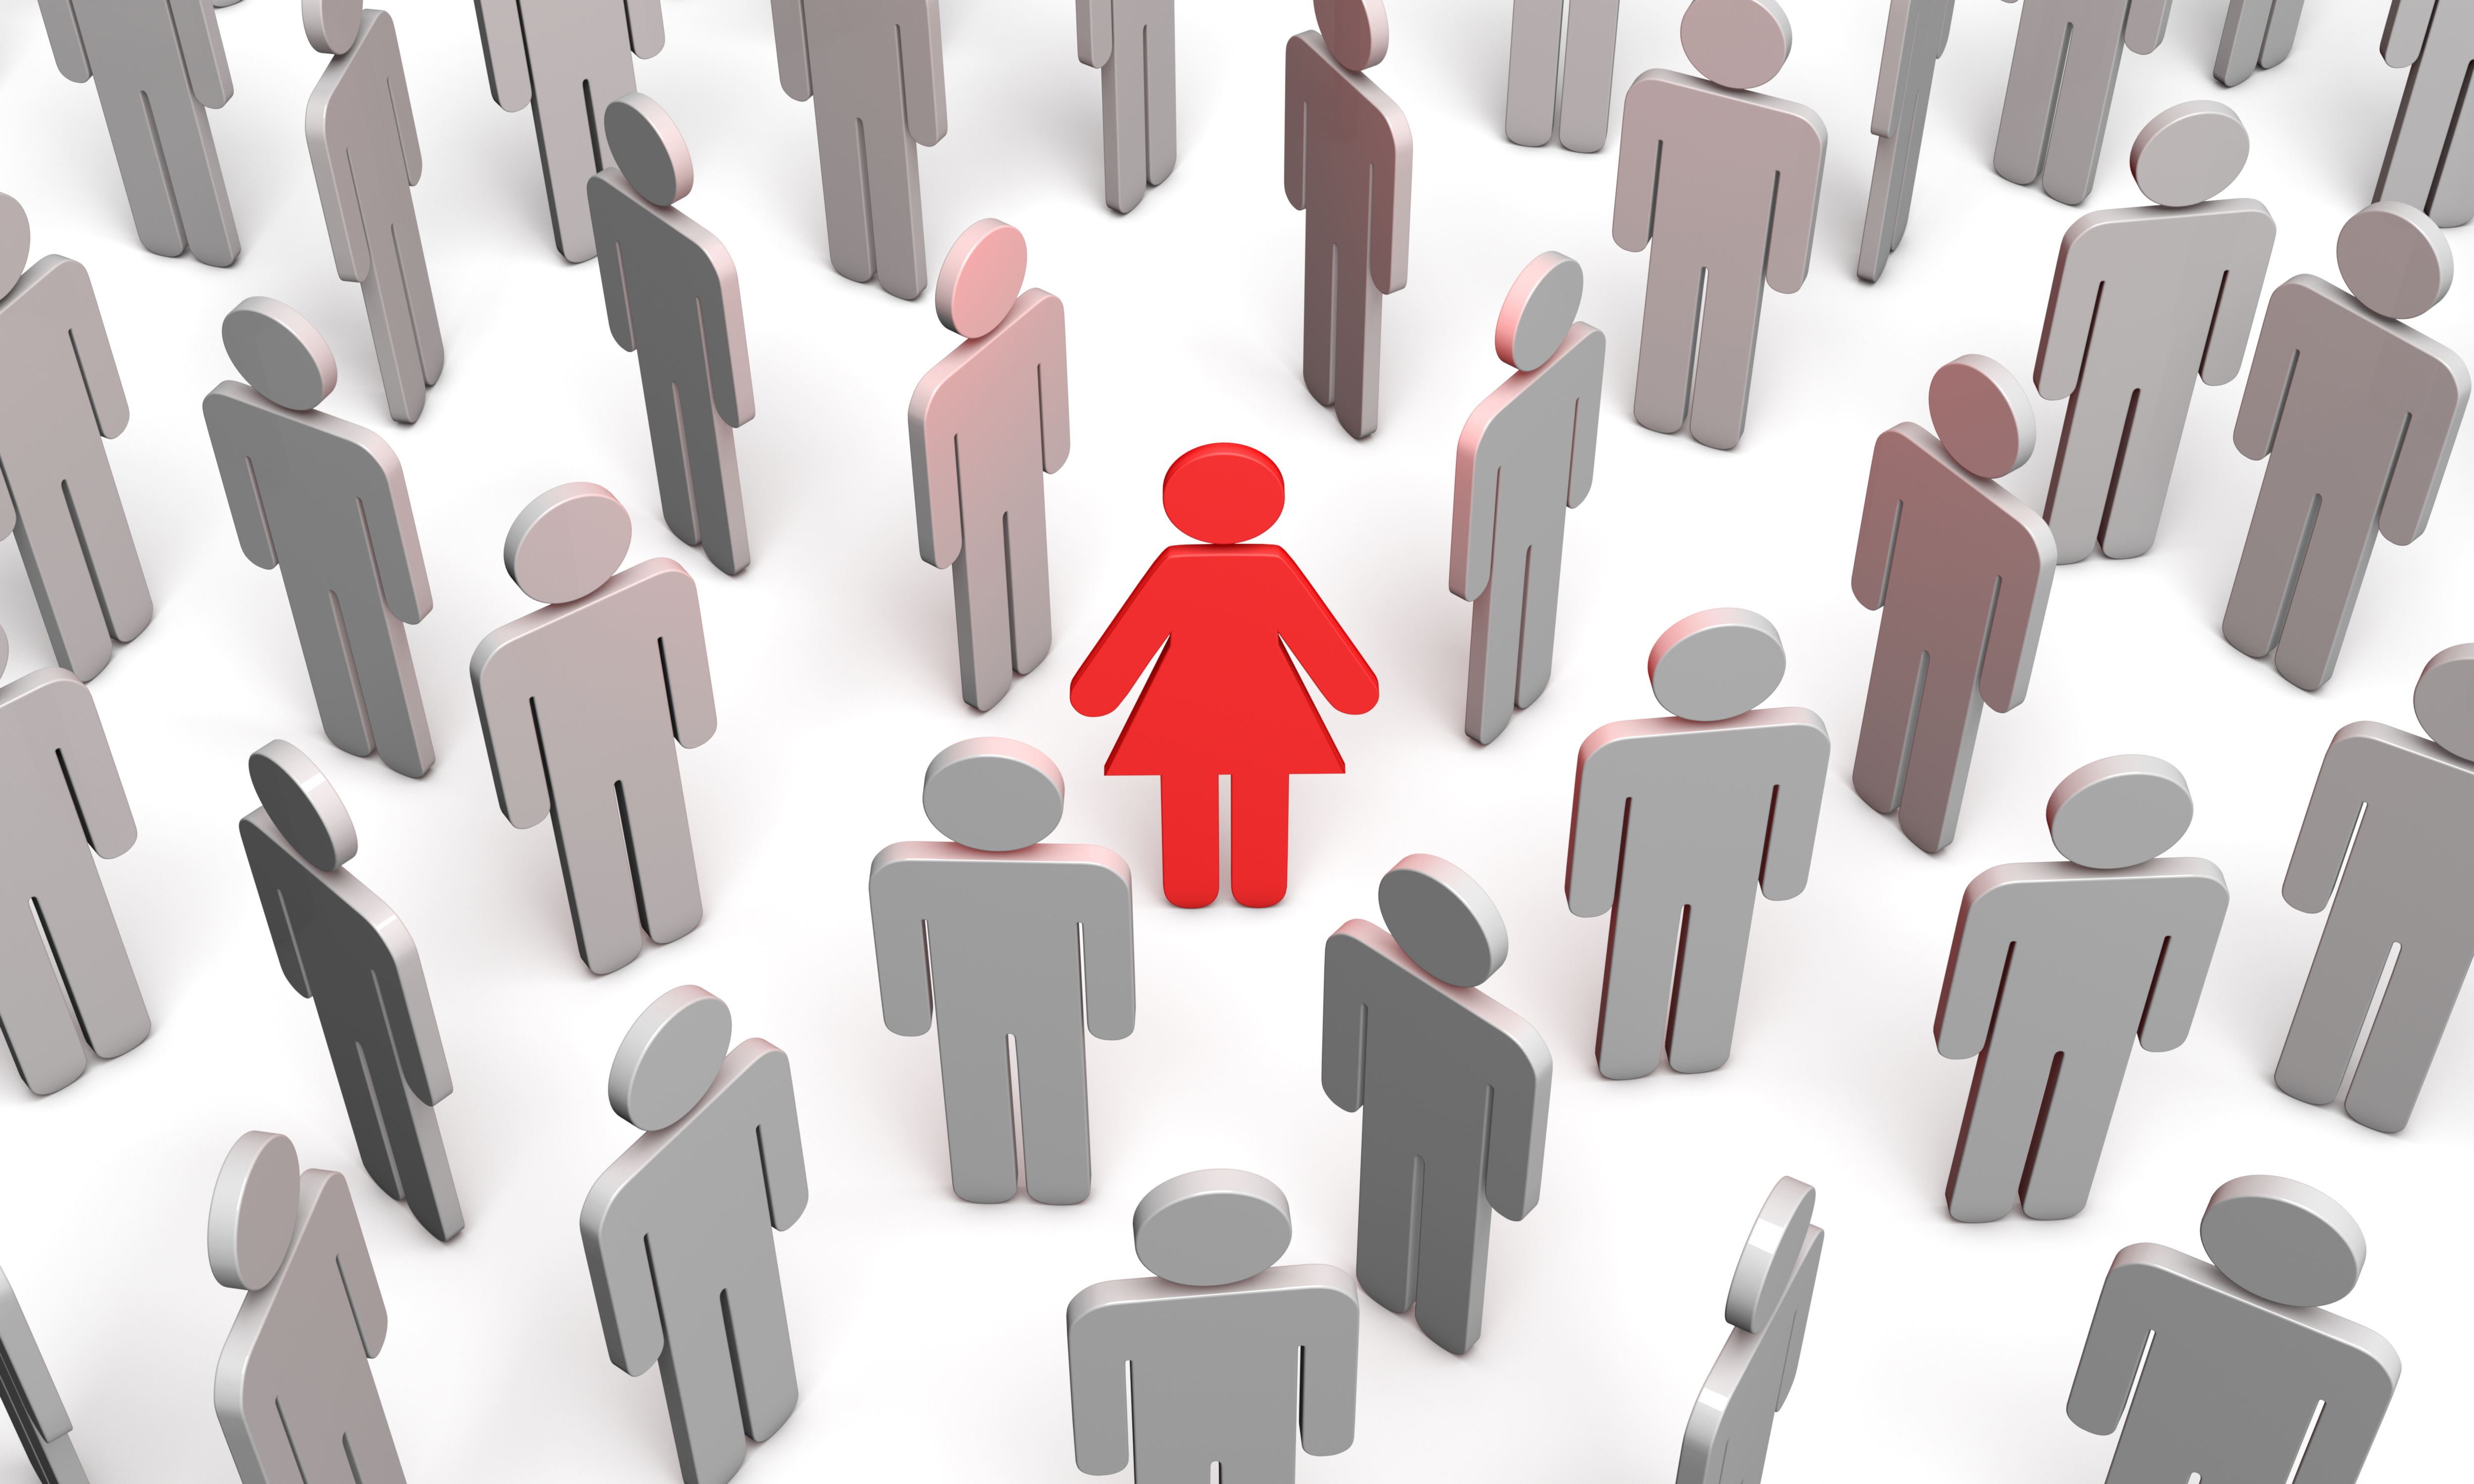 A crowd of gray faceless avatar icons representing male figures surround a red female icon in the middle.